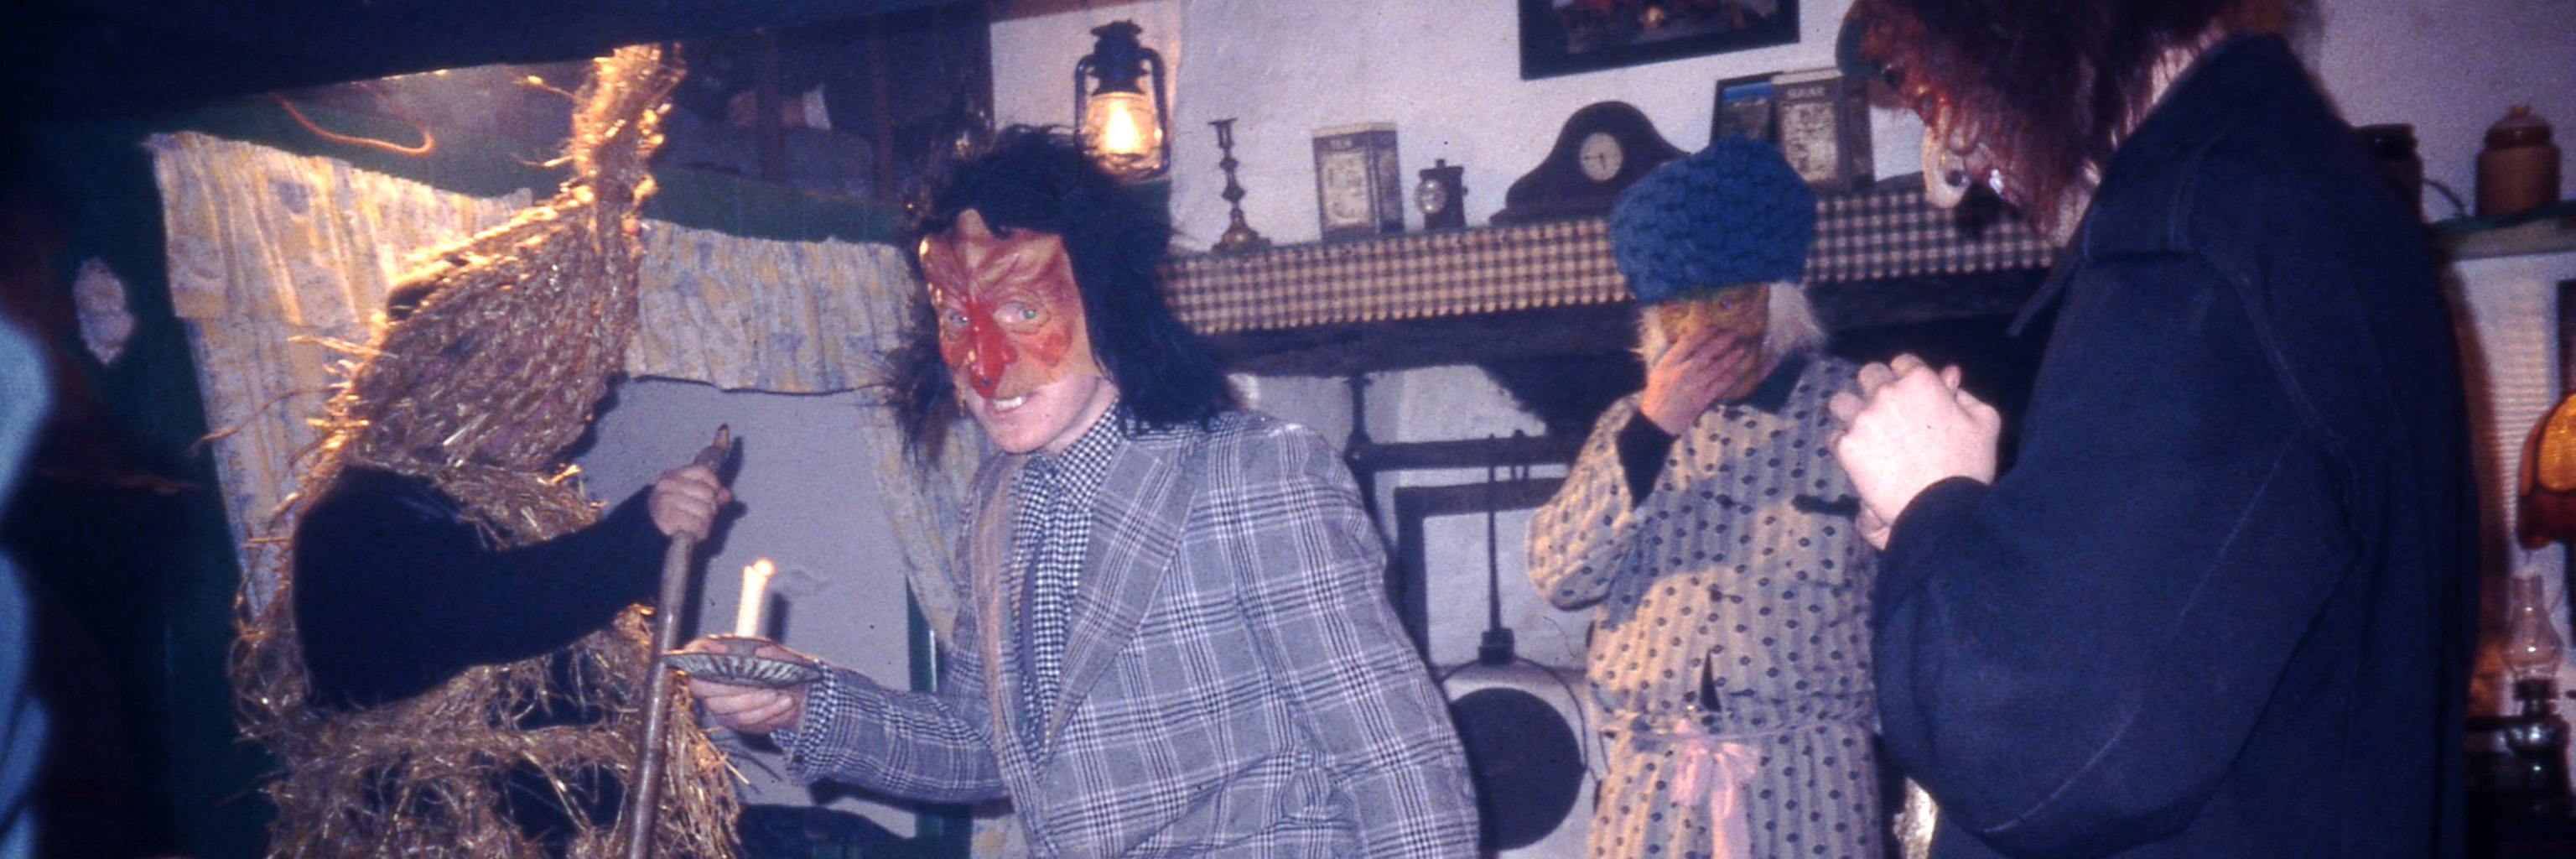 People dressed in costumes, dancing around a room.